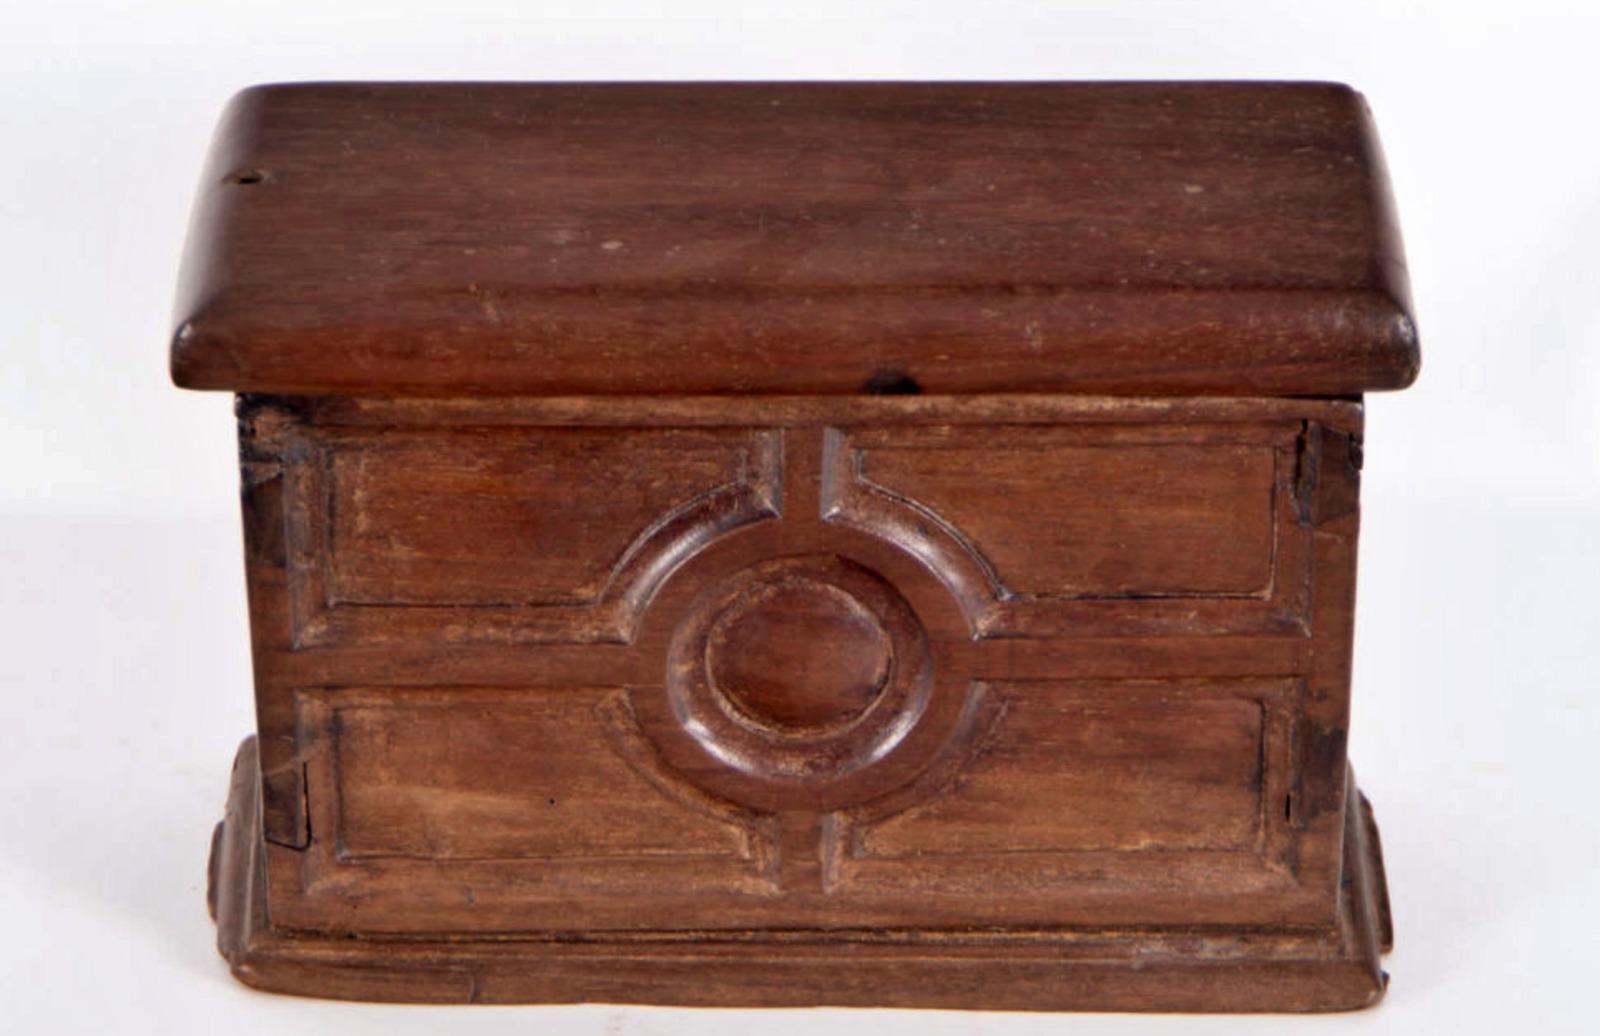 Box for the Holy Oils, Spanish school of the 17th century
In wood. Box measurements: 15 x 22 x 8 cm
good condition.